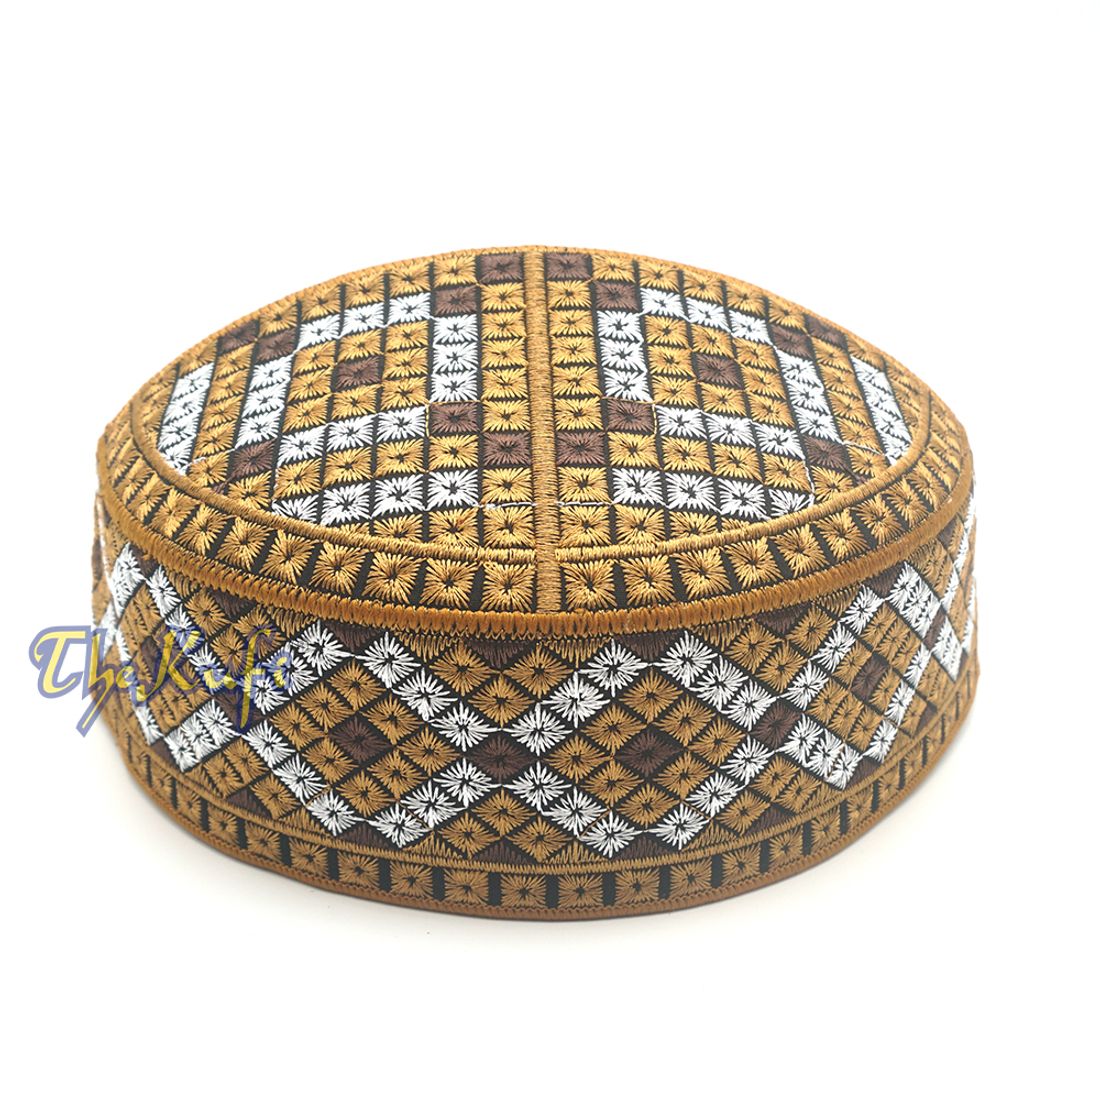 Rust Brown, Silver, Dark Brown Intricately Embroidered Rigid Round Pakistani-style Kufi Hat